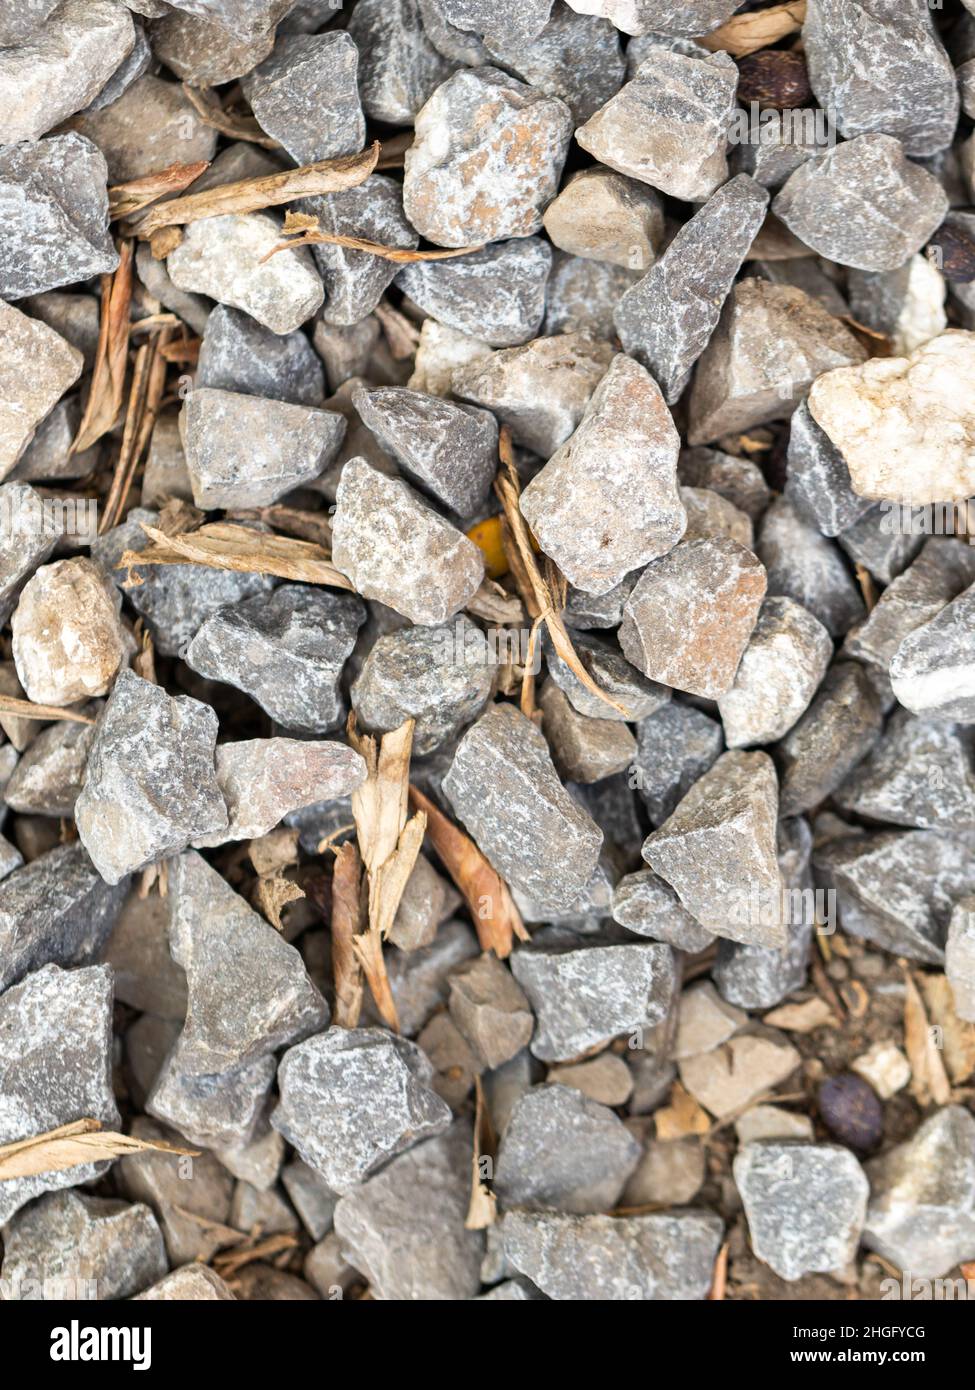 Texture of gravel scattered on the ground Stock Photo